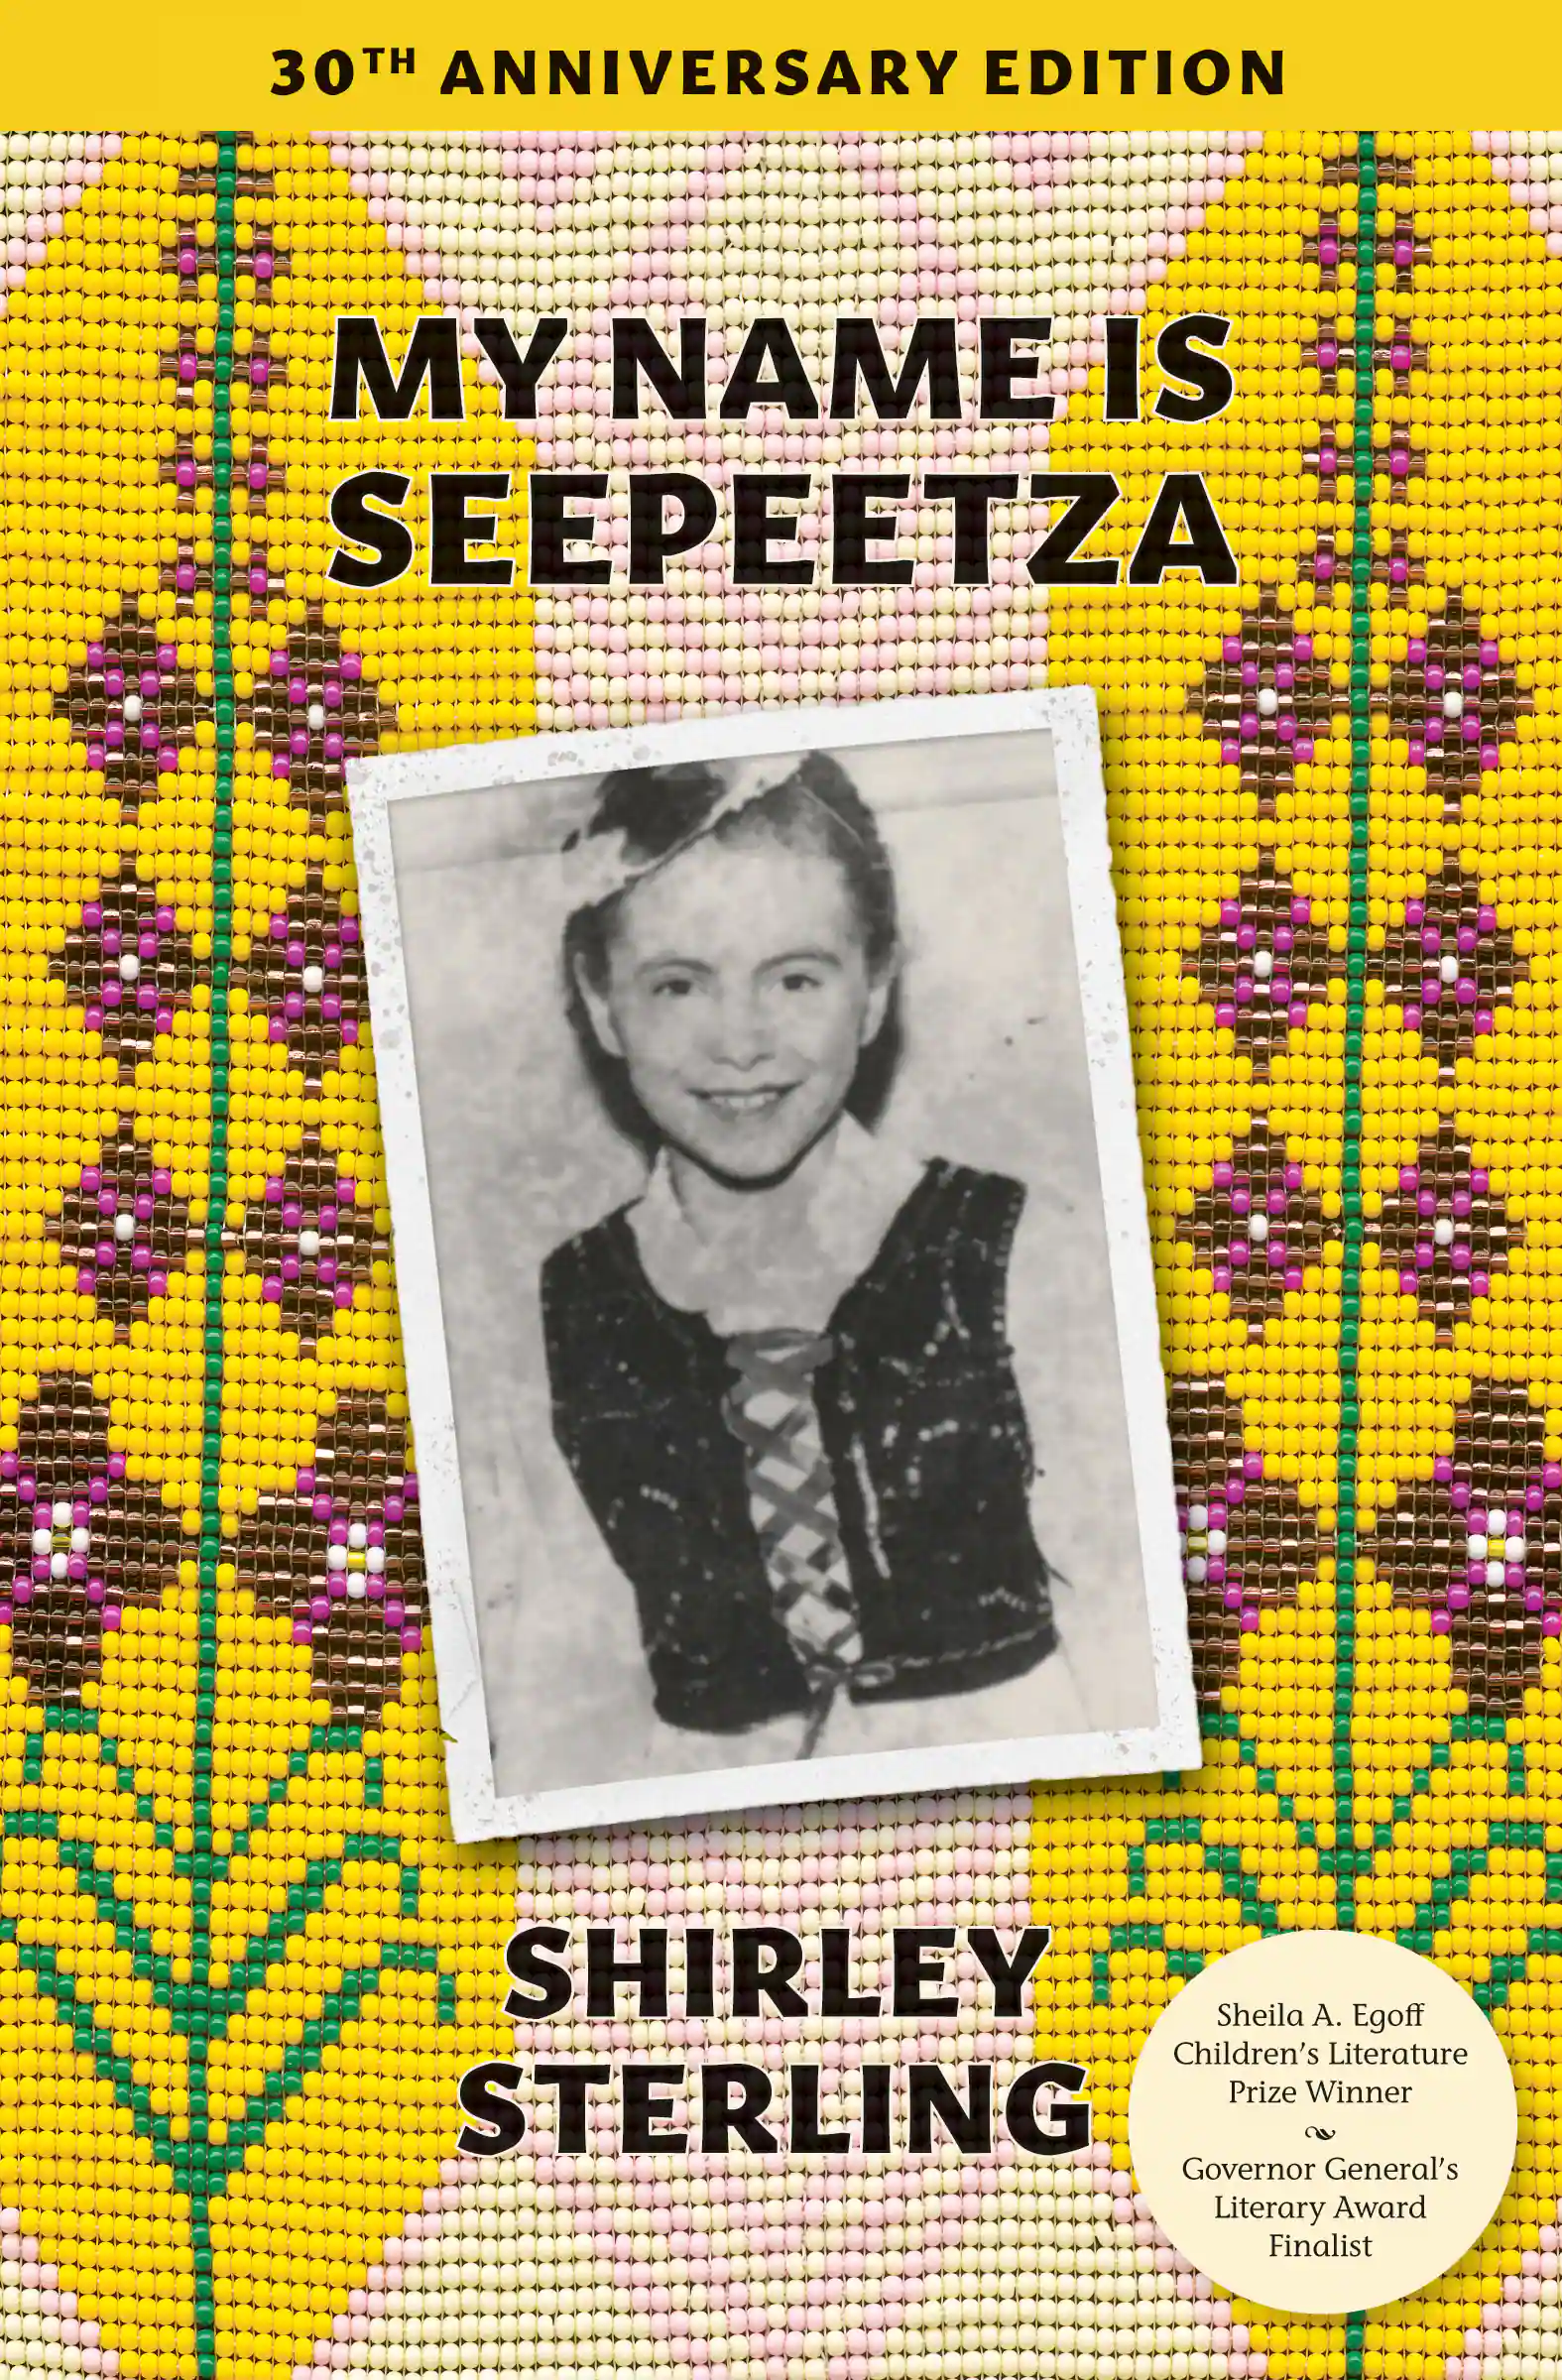 book cover with a black and white image of a young girl smiling and woven flower and plant illustration